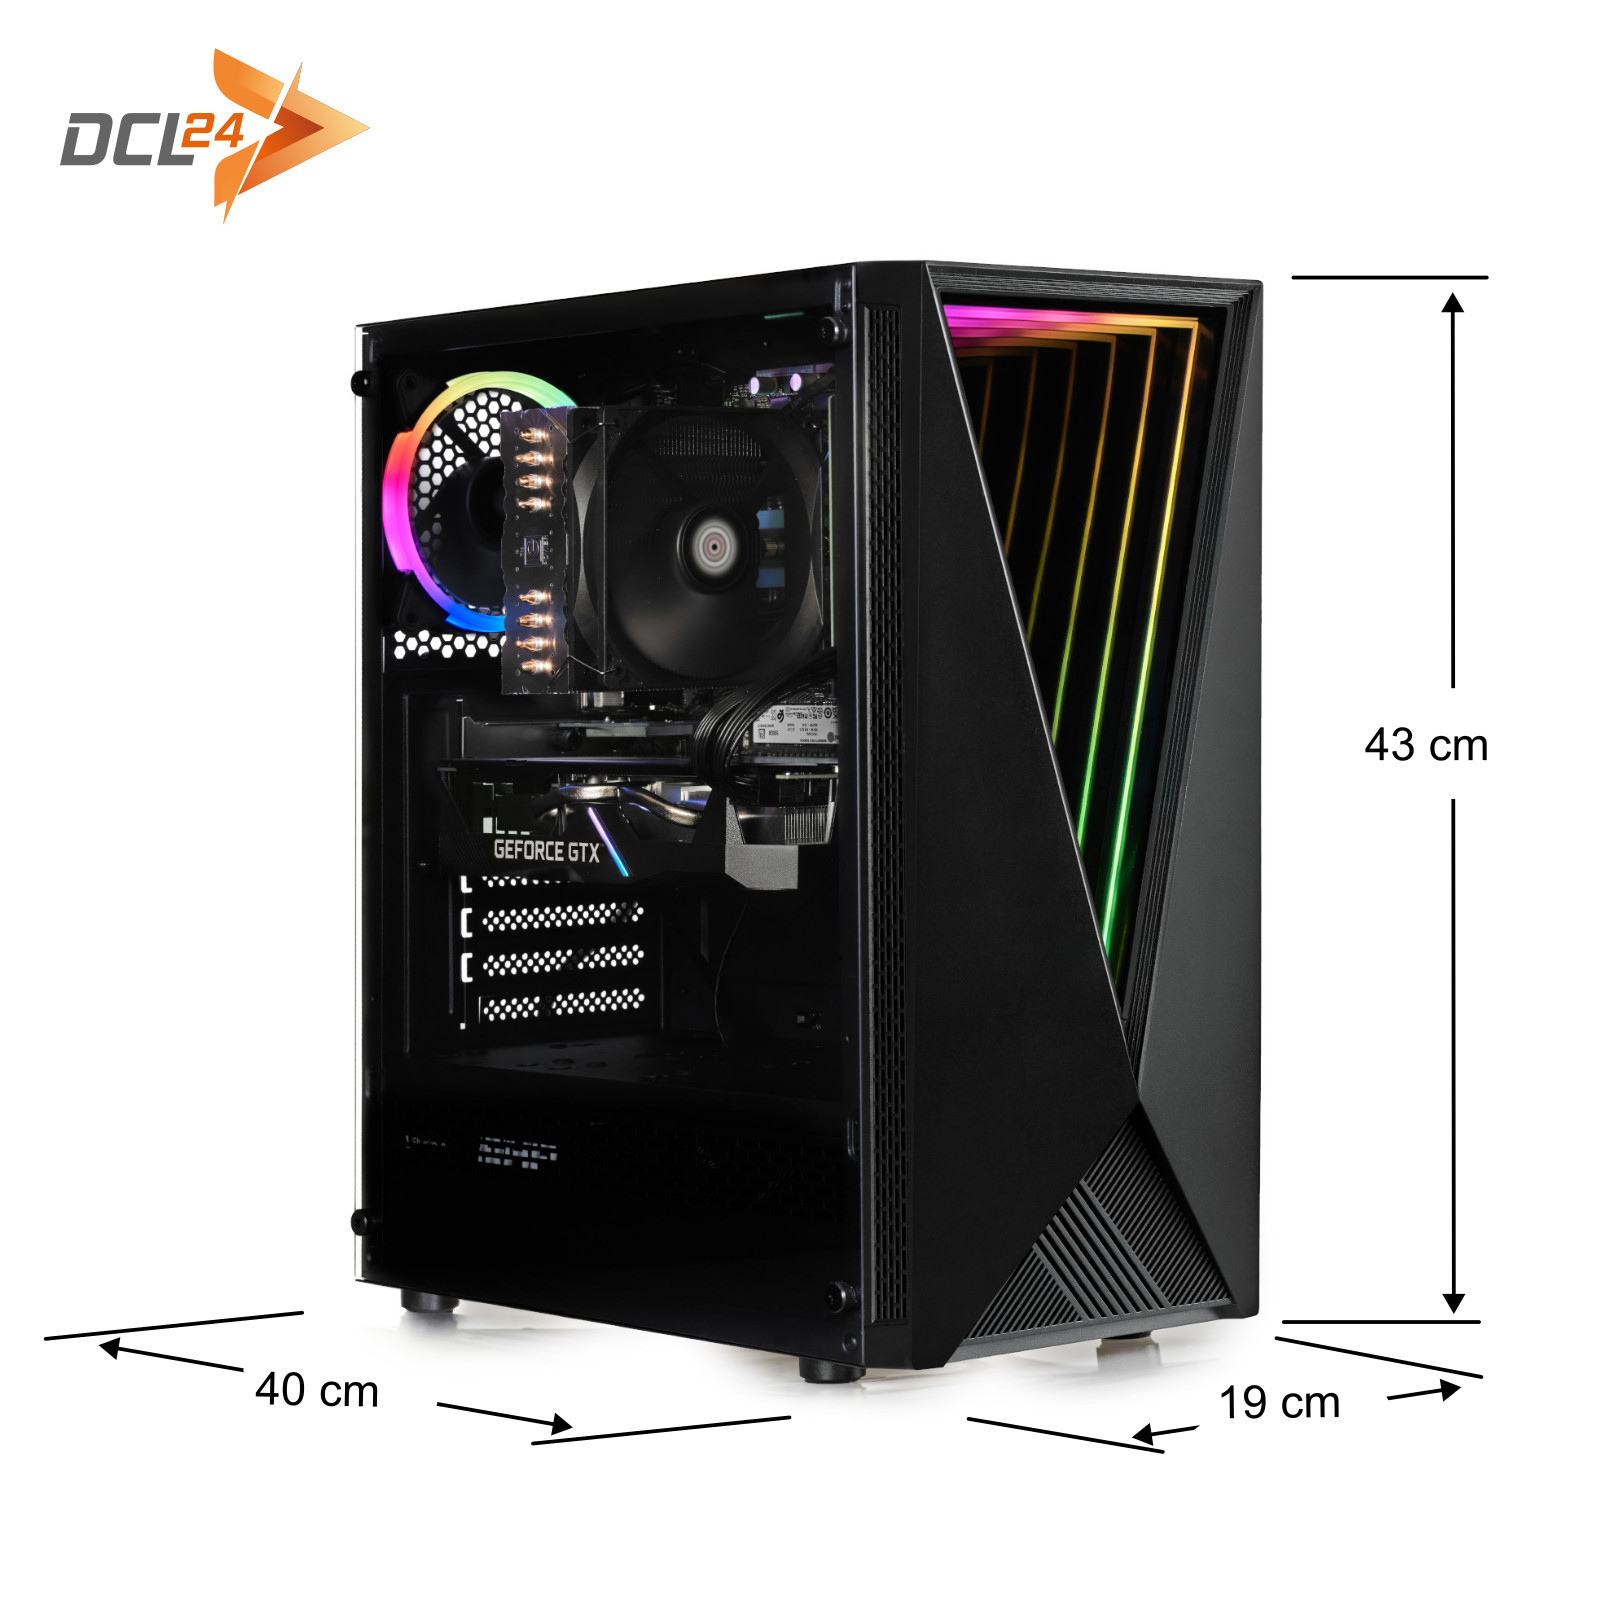 Void, 16 Gaming RAM, SSD PC, DCL24 GB 1000 GB